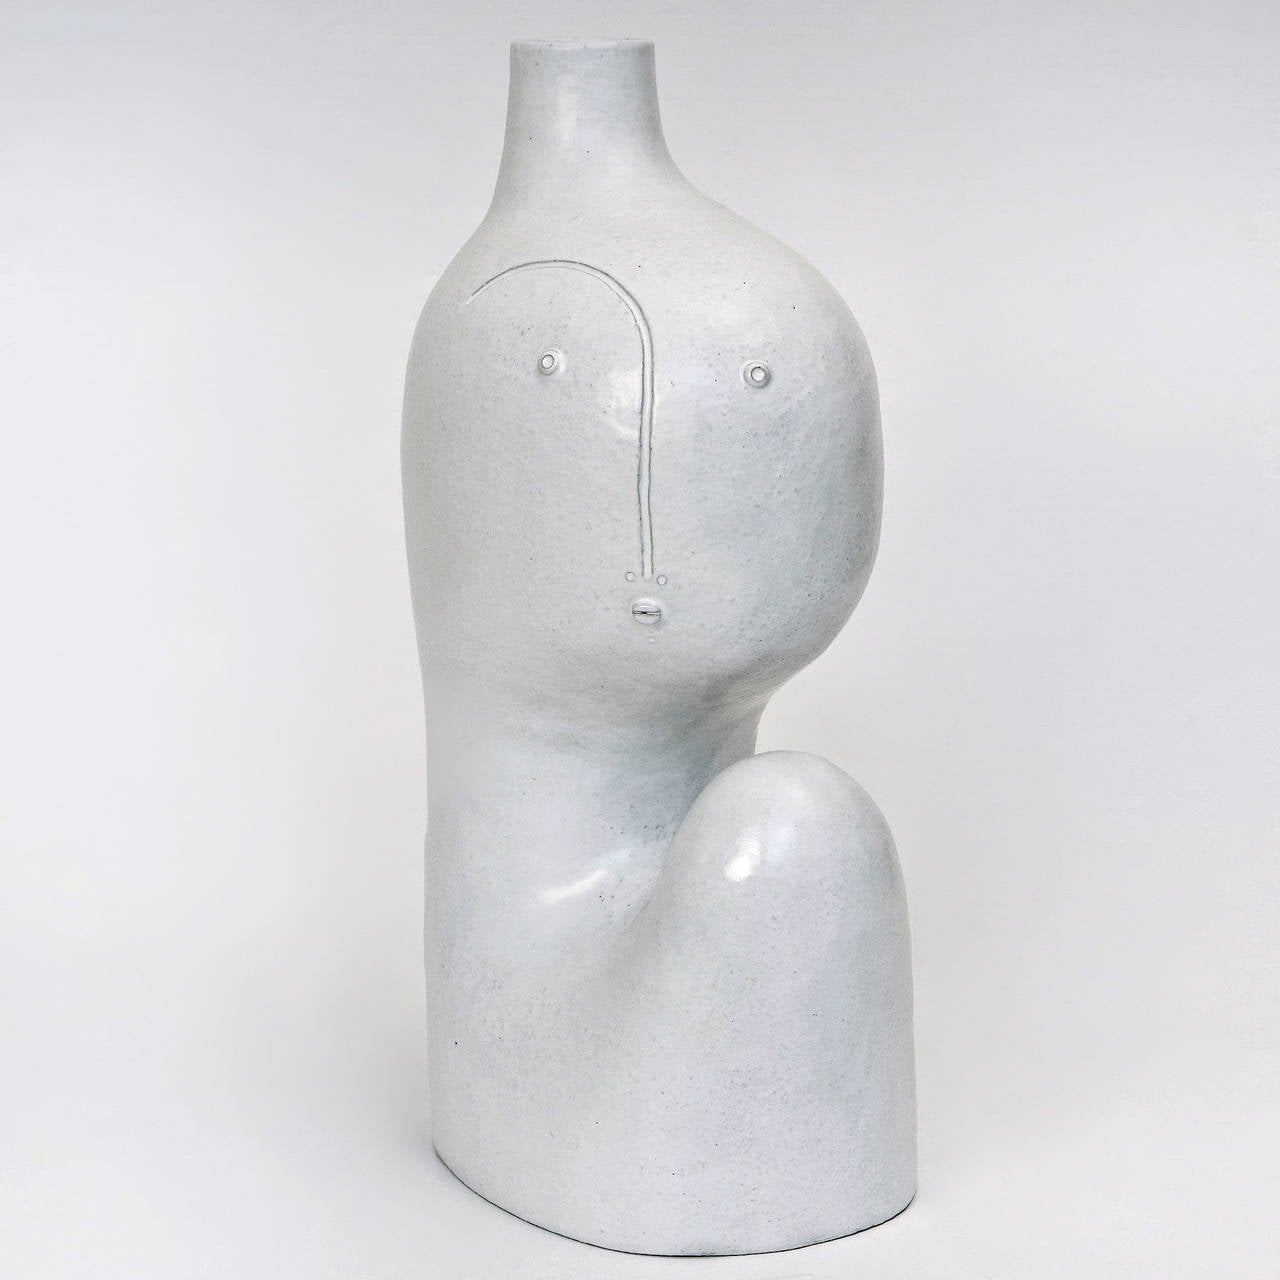 A spectacular biomorphic sculpture which can also be wired as a table-lamp ; stoneware glazed in deep milky white, forming a stylized and abstract human figure. 

Each piece signed by the DaLo, hand sculpted, is unique. 

The dimensions approx.